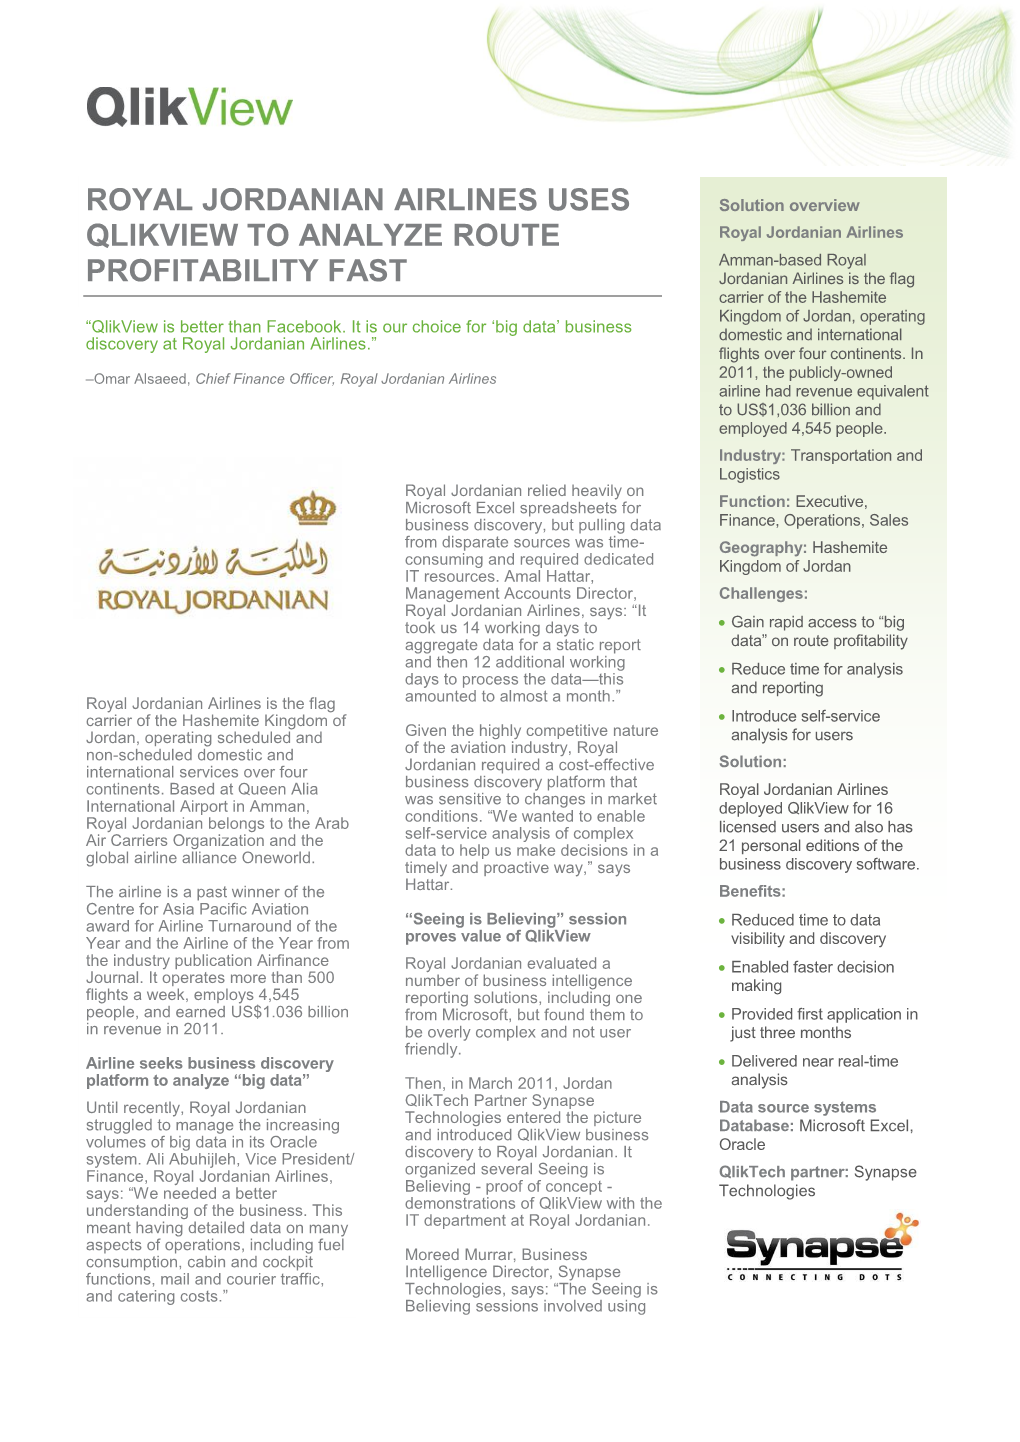 Royal Jordanian Airlines Uses Qlikview to Analyze Route